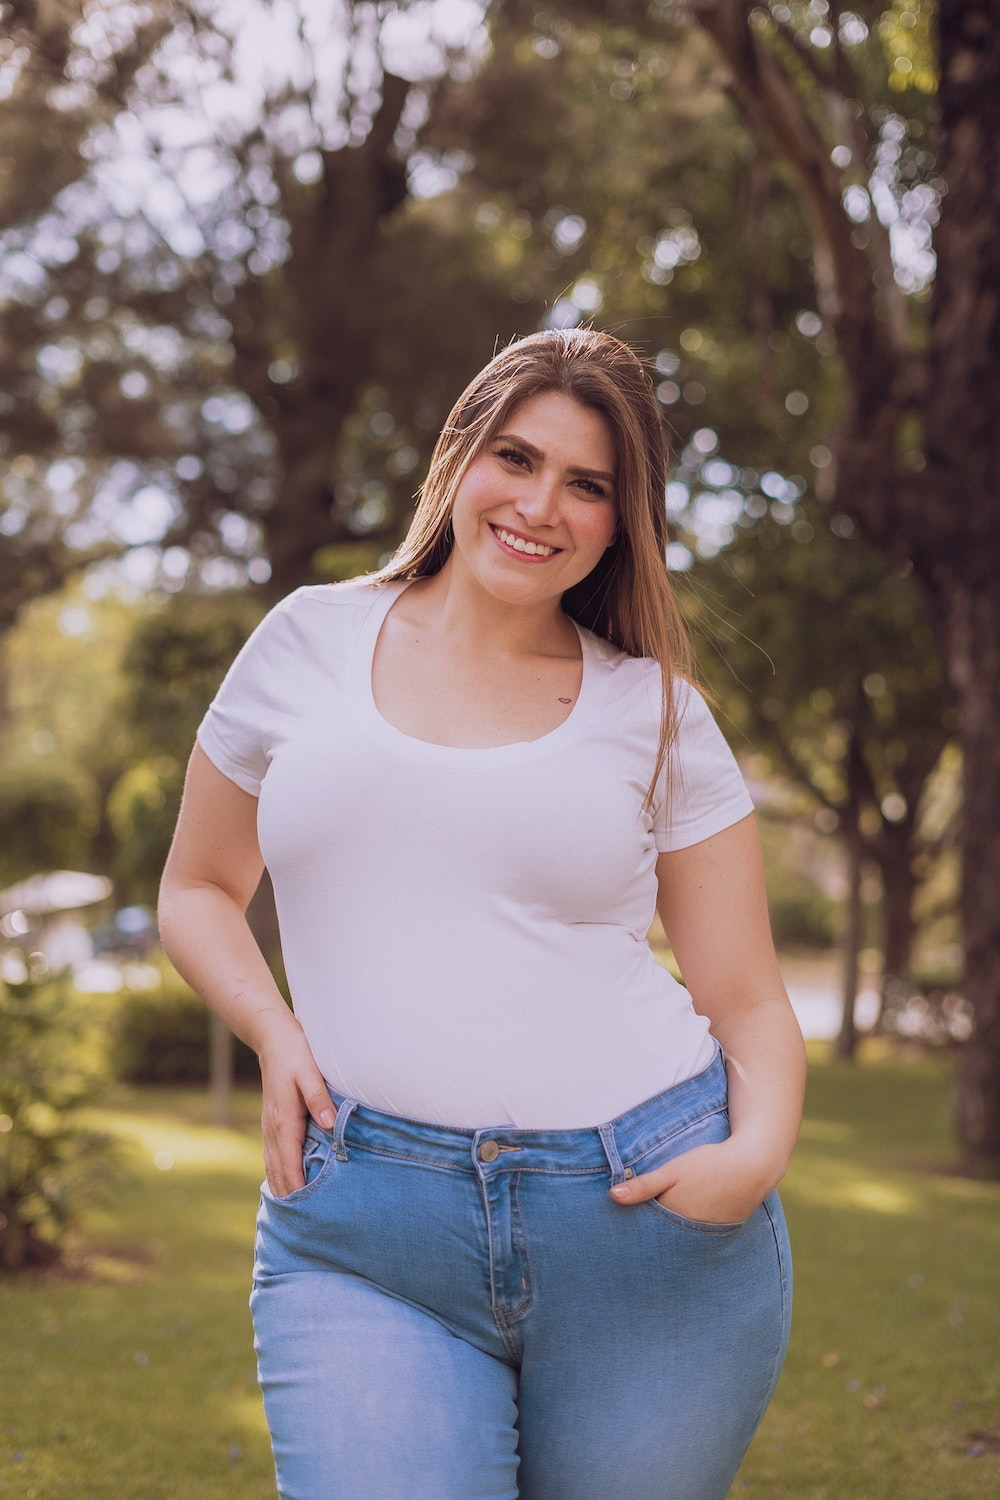 How To Dress In Summer: Plus Size Women Guide | Panaprium